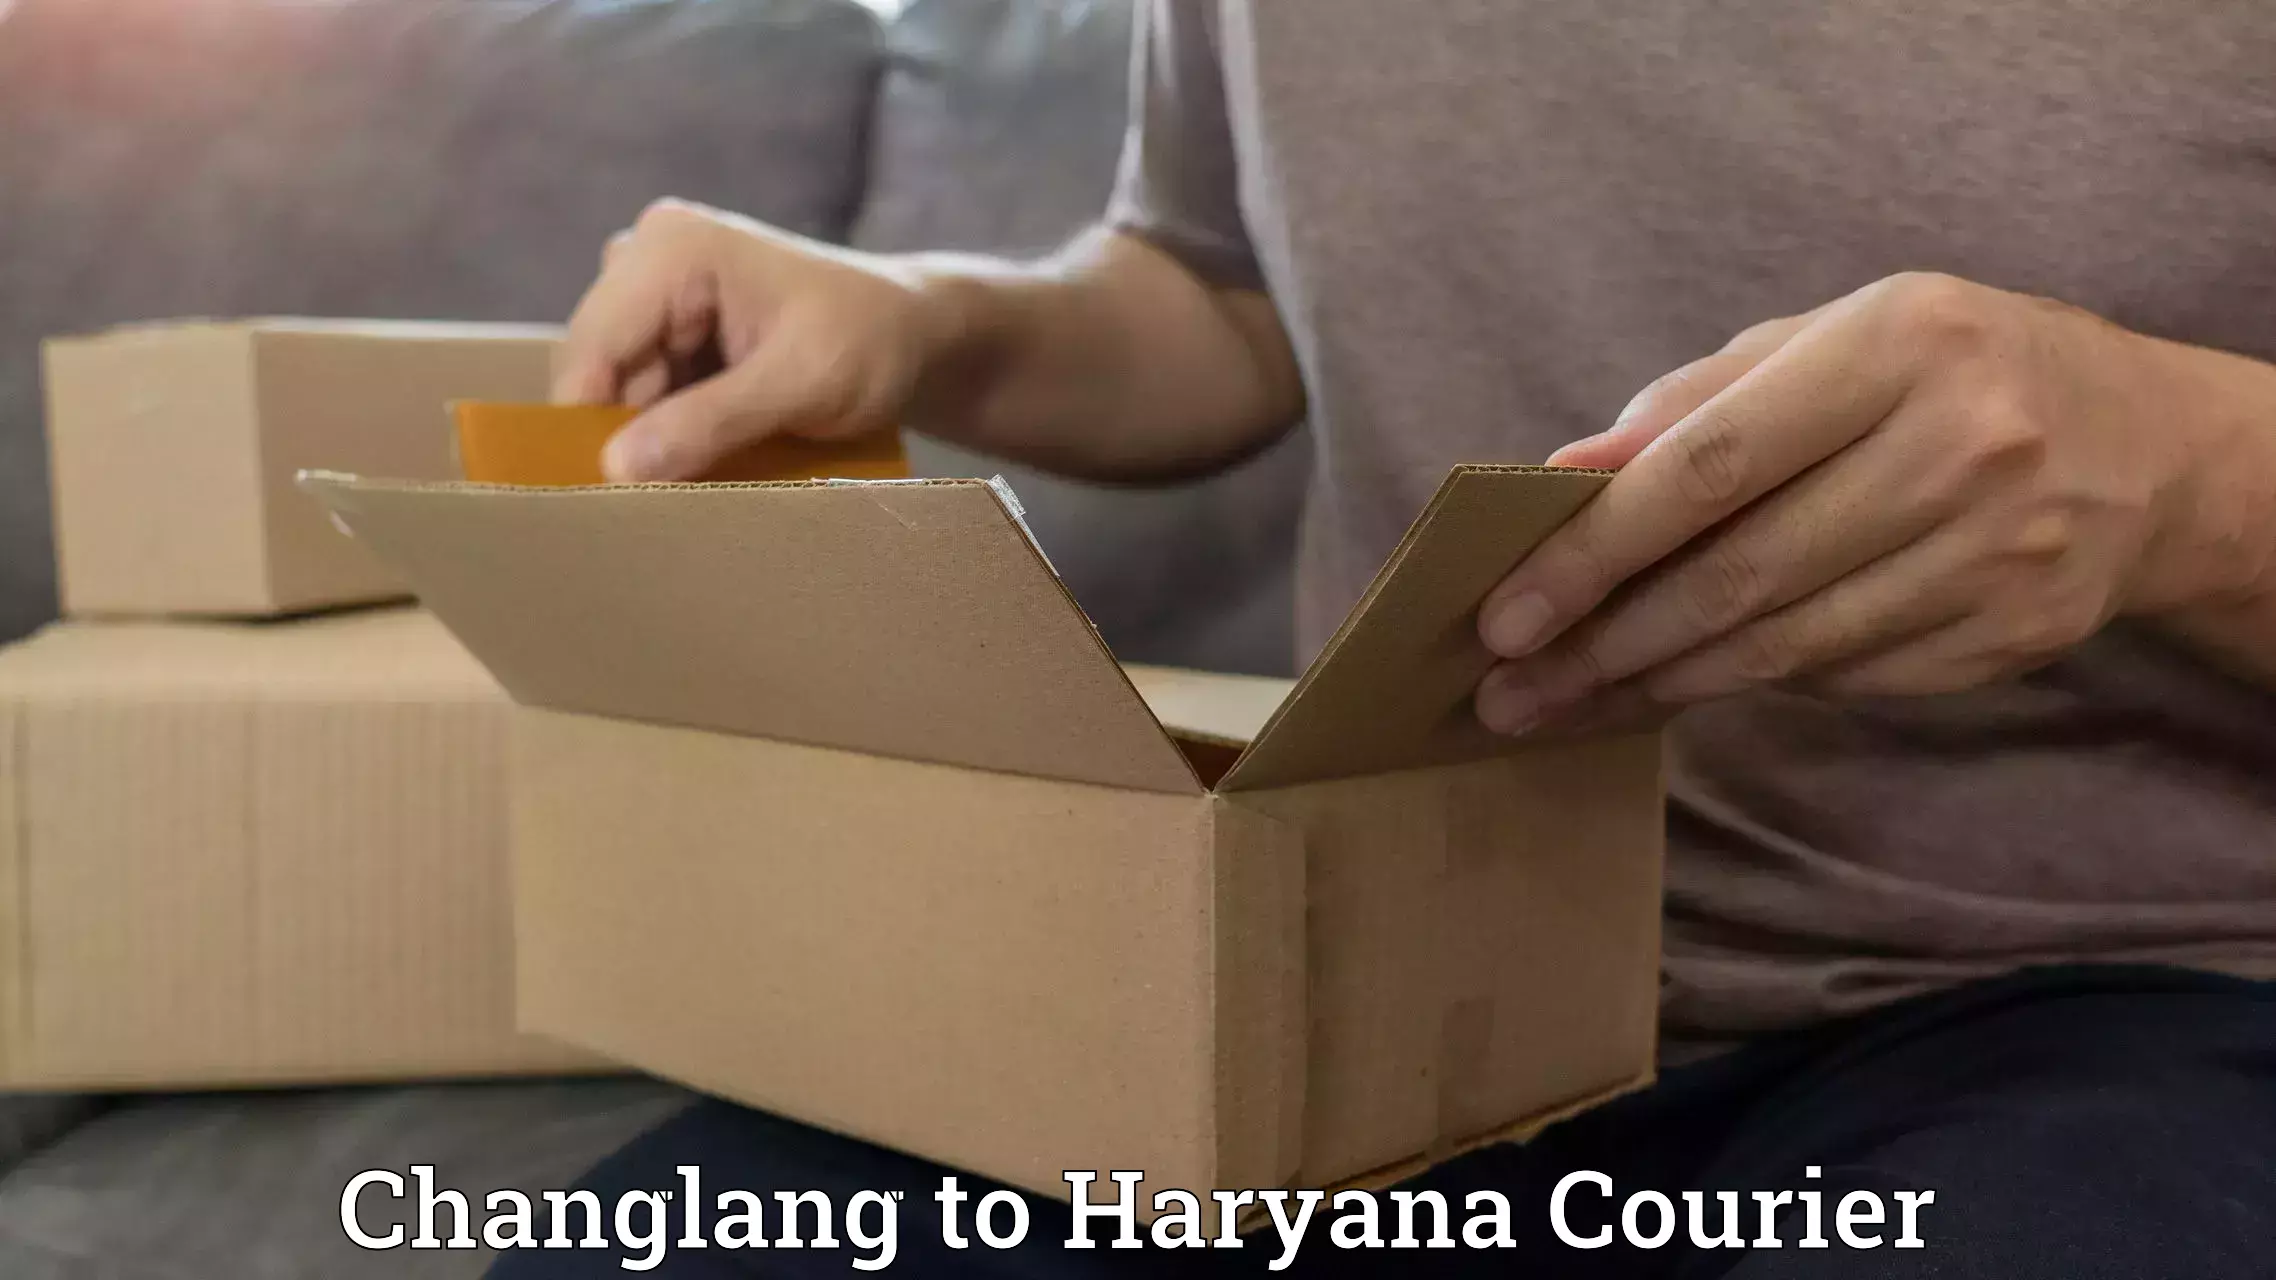 Efficient parcel service Changlang to Sirsa